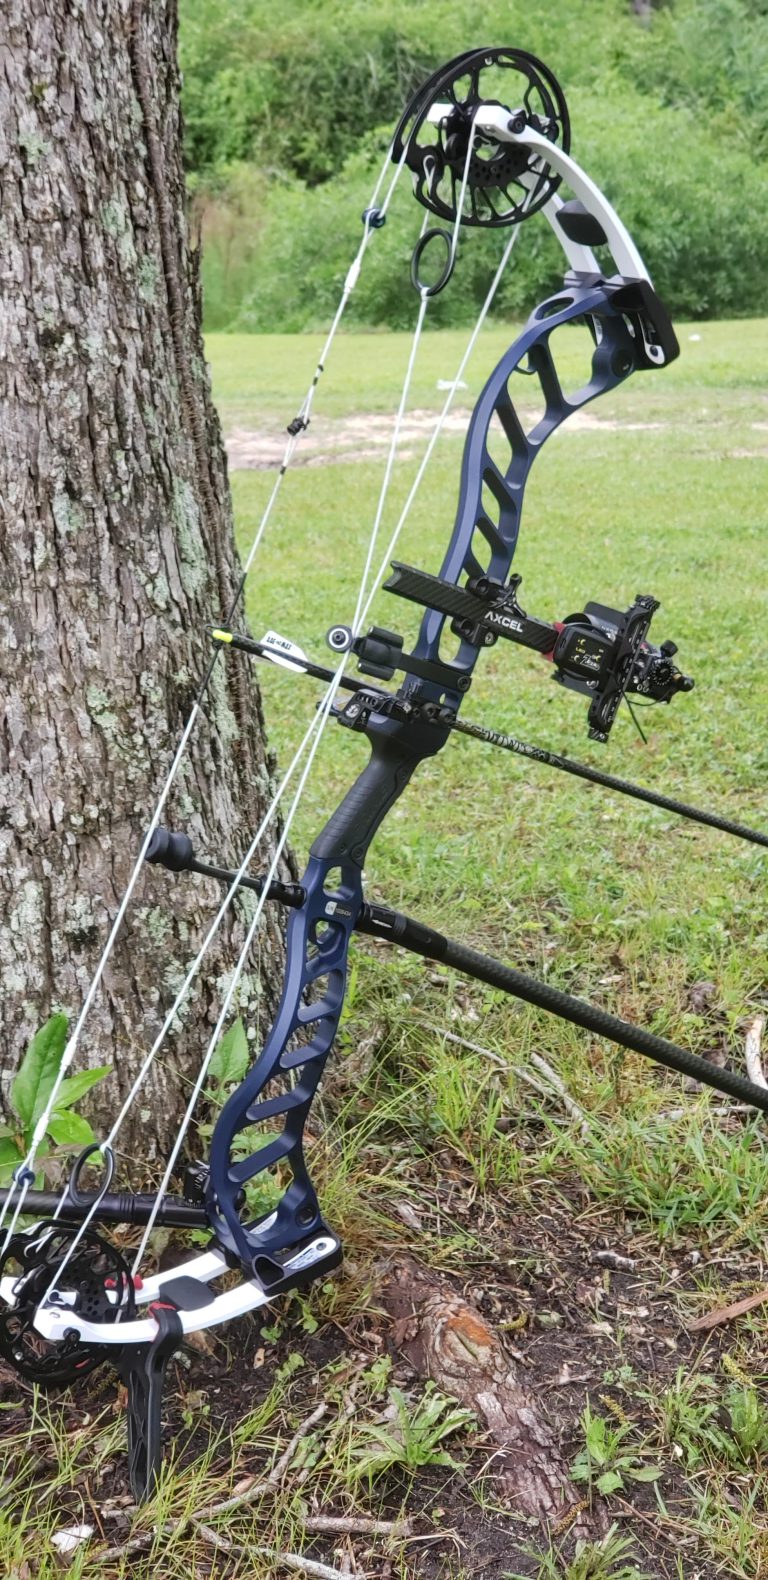 Prime Defy Compound Bow Specifications: Power, Precision, Performance